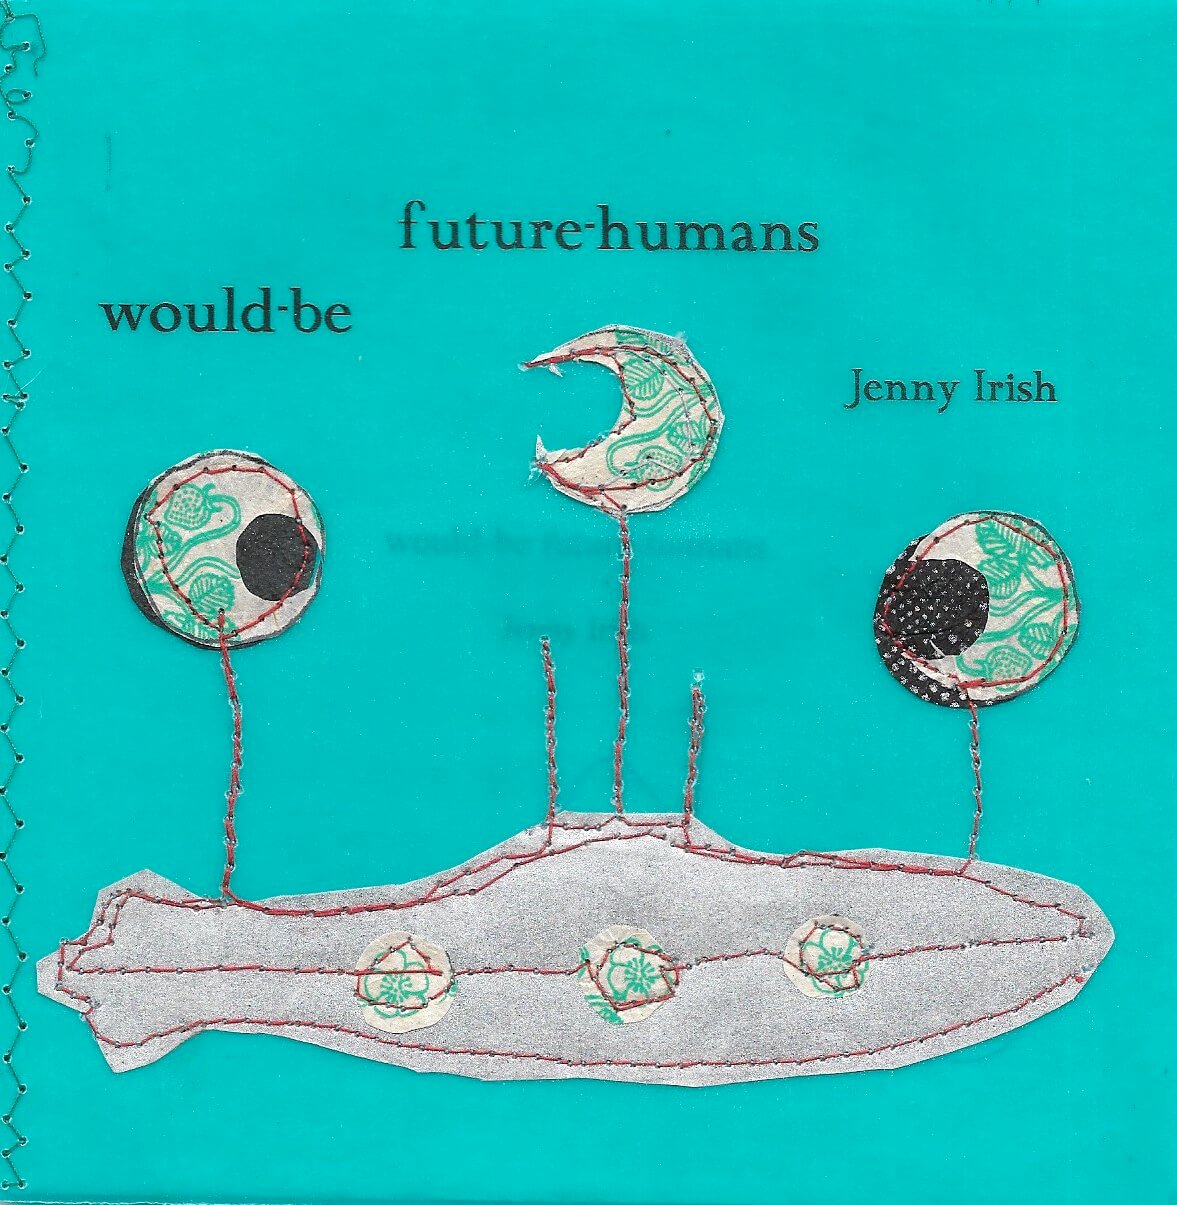 would-be future-humans